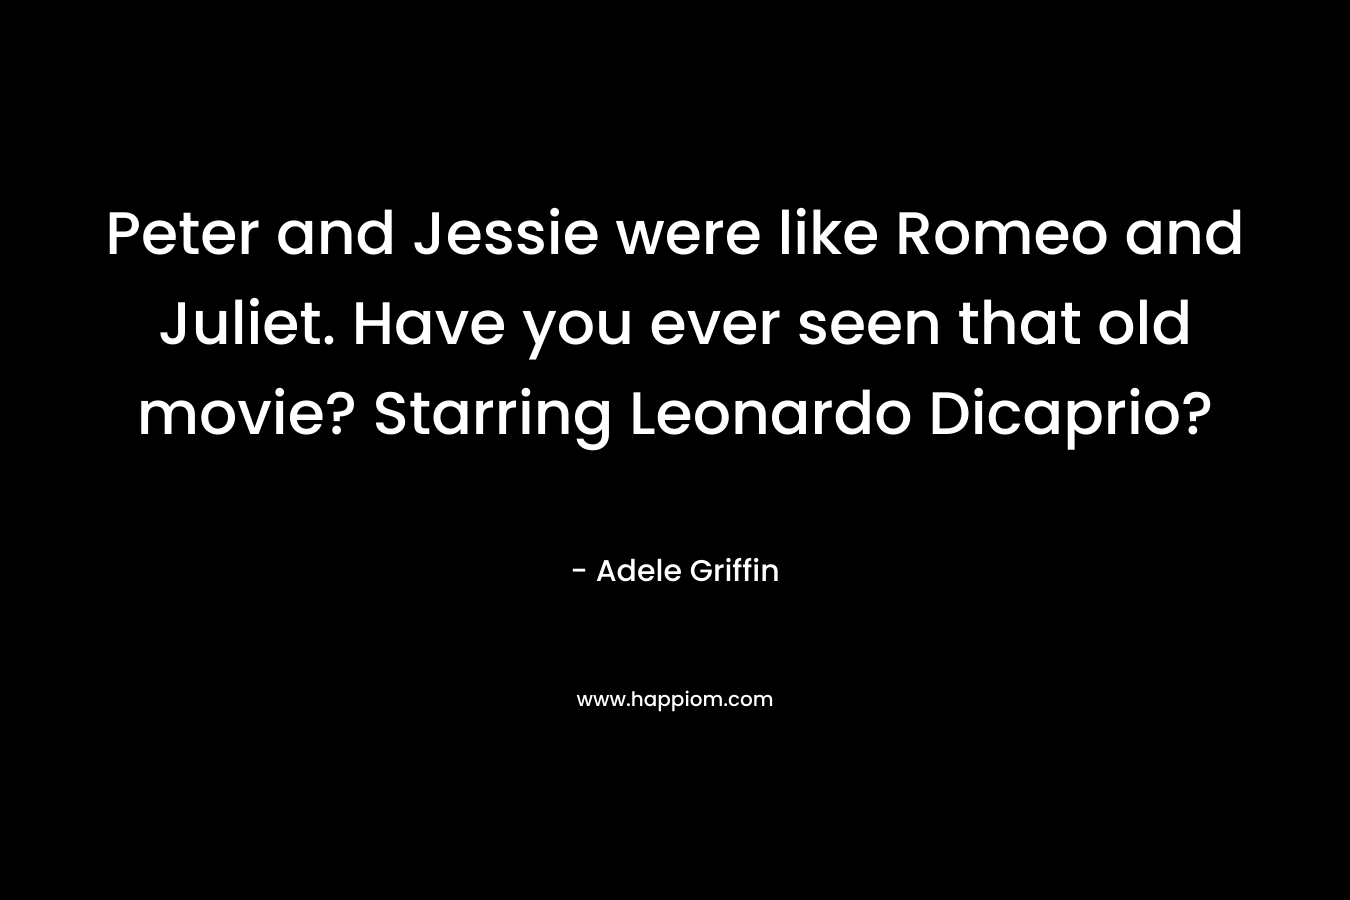 Peter and Jessie were like Romeo and Juliet. Have you ever seen that old movie? Starring Leonardo Dicaprio? – Adele Griffin